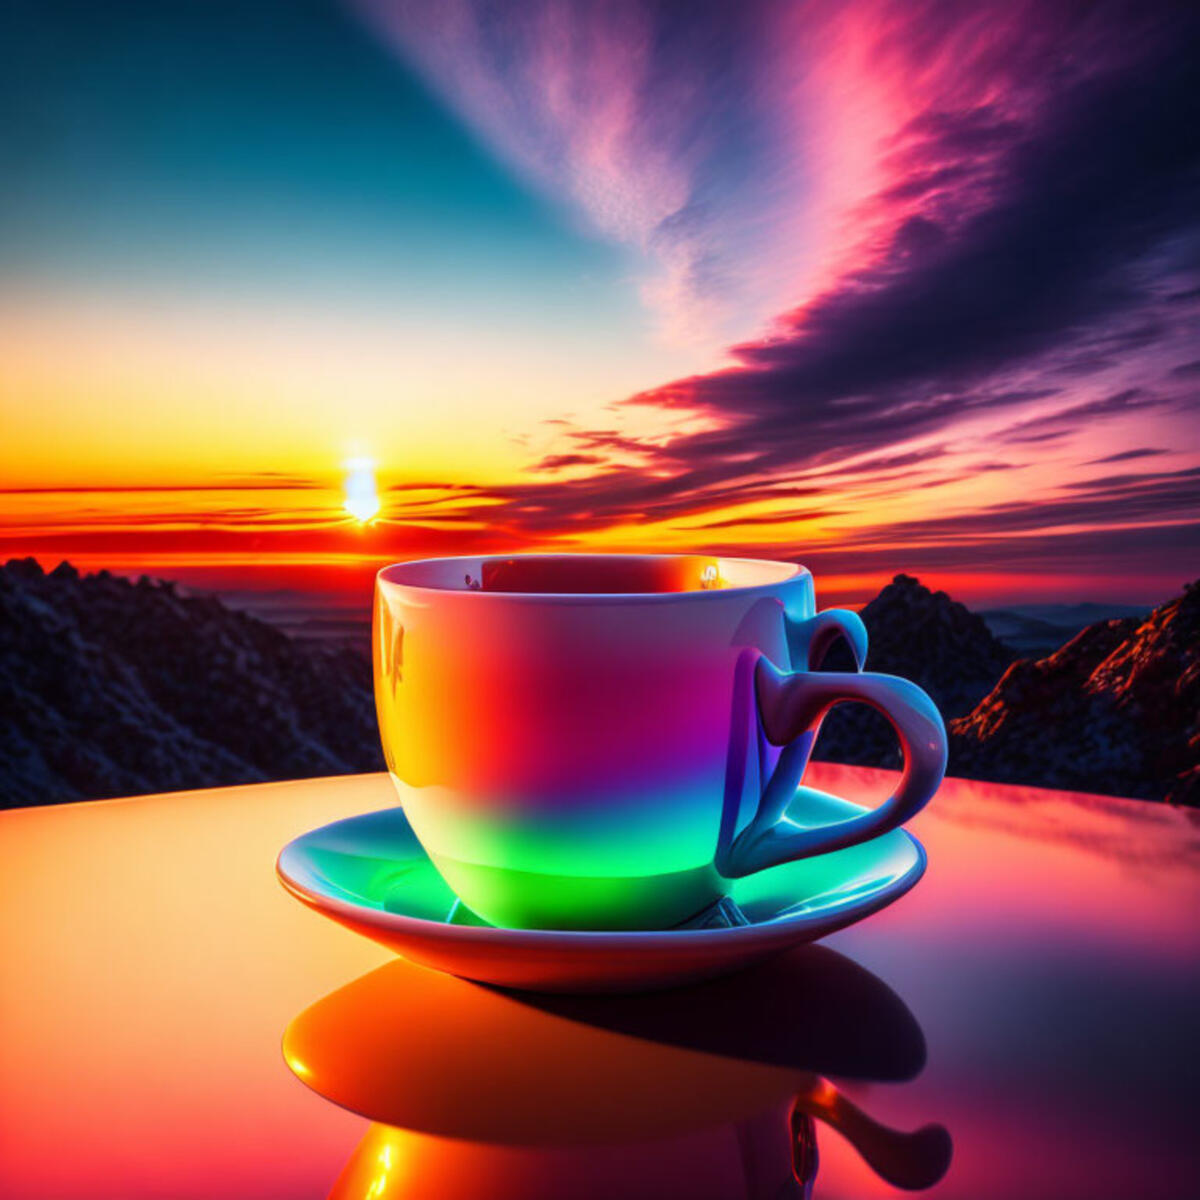 A fantastically colorful cup of coffee at dawn